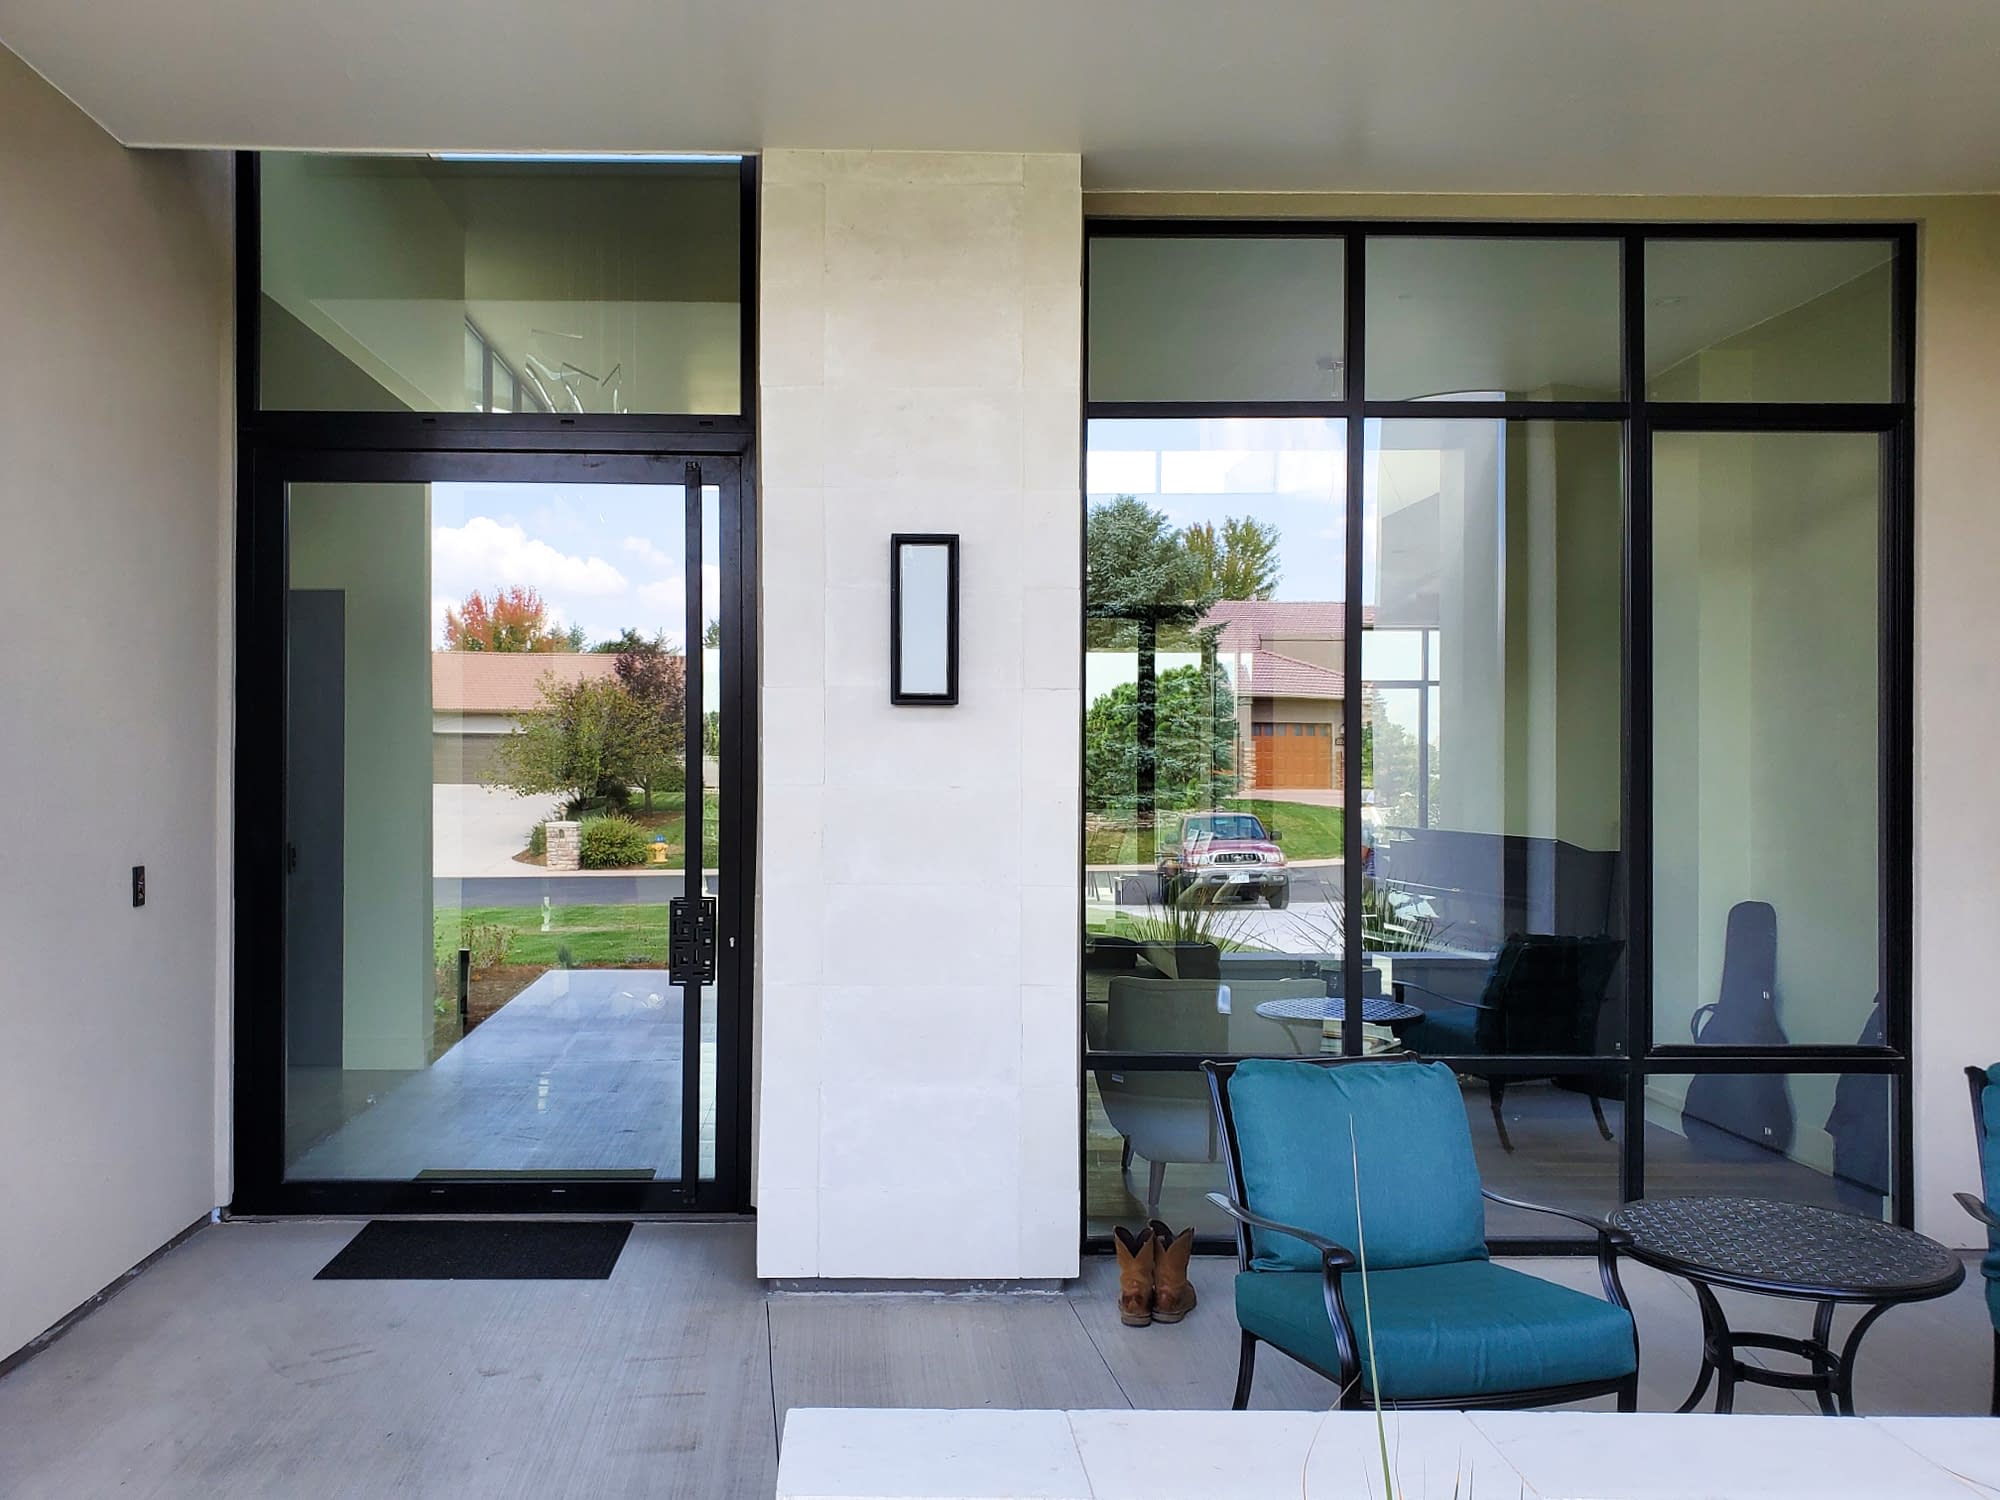 Natural light floods this home through the glass pivot door and curtain wall.